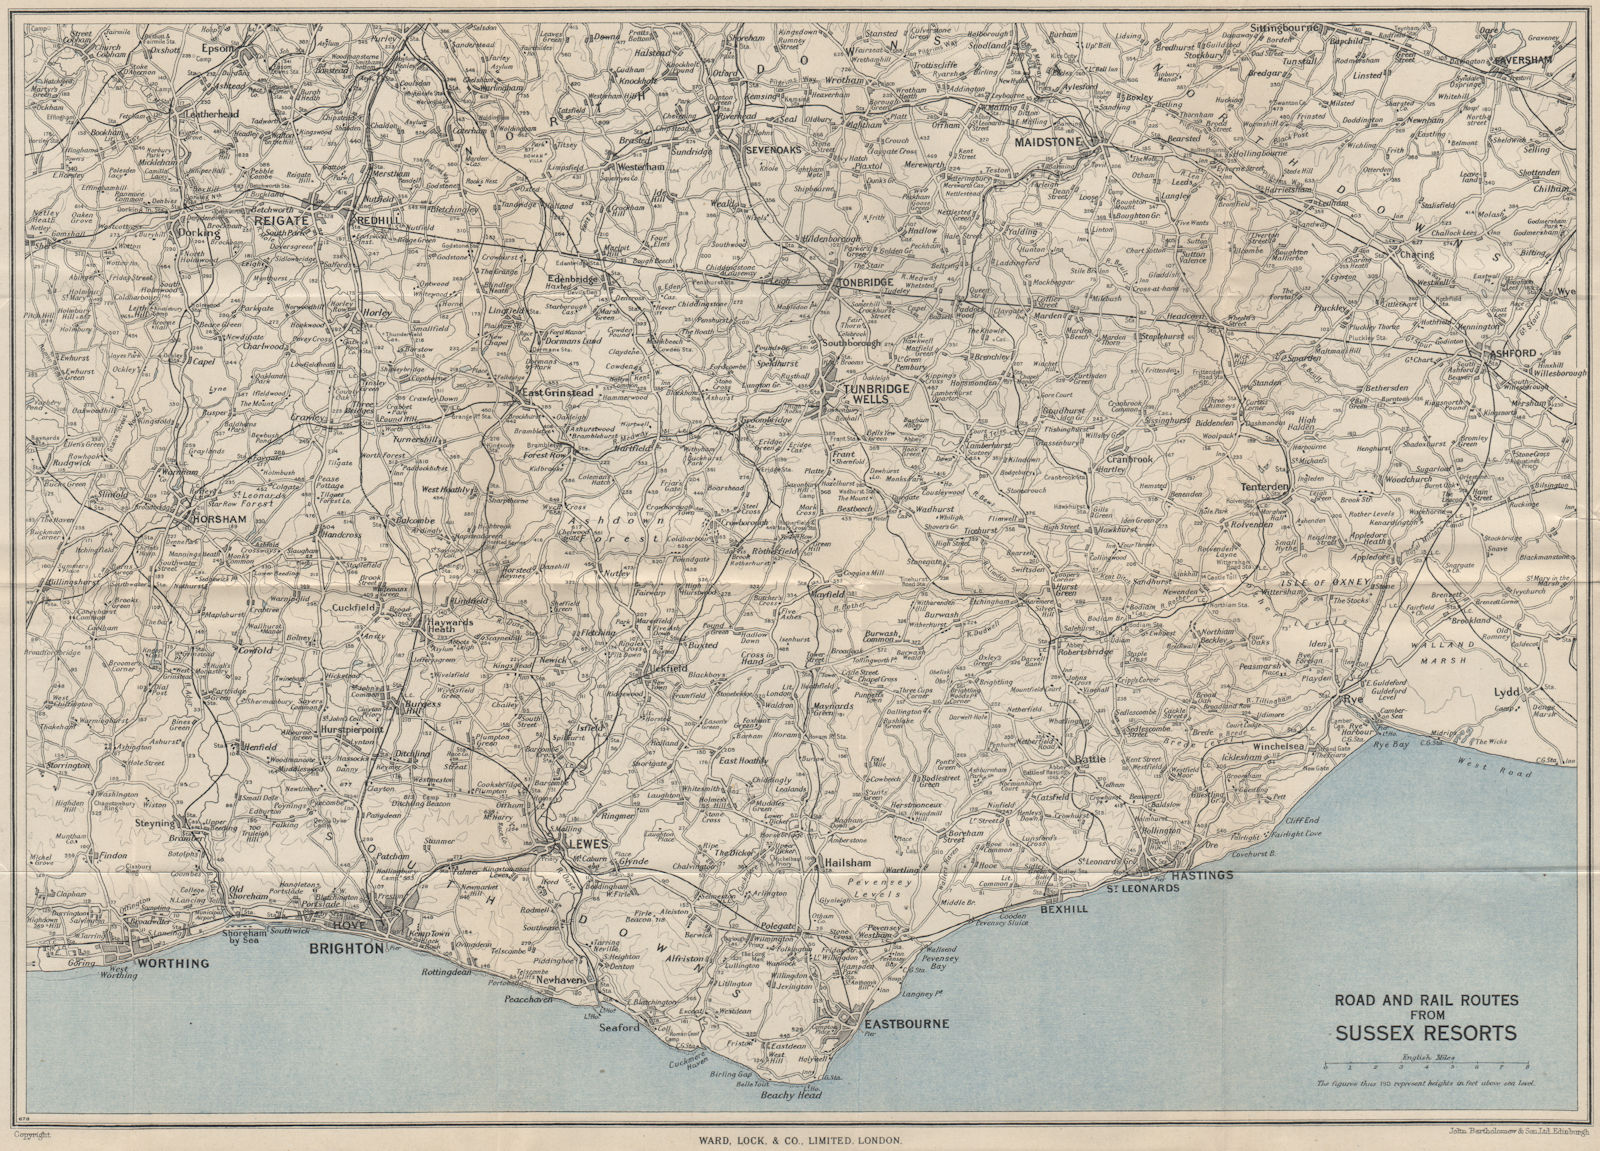 E. SUSSEX/SOUTH DOWNS. Tunbridge Wells Eastbourne Brighton Hastings Rye 1950 map